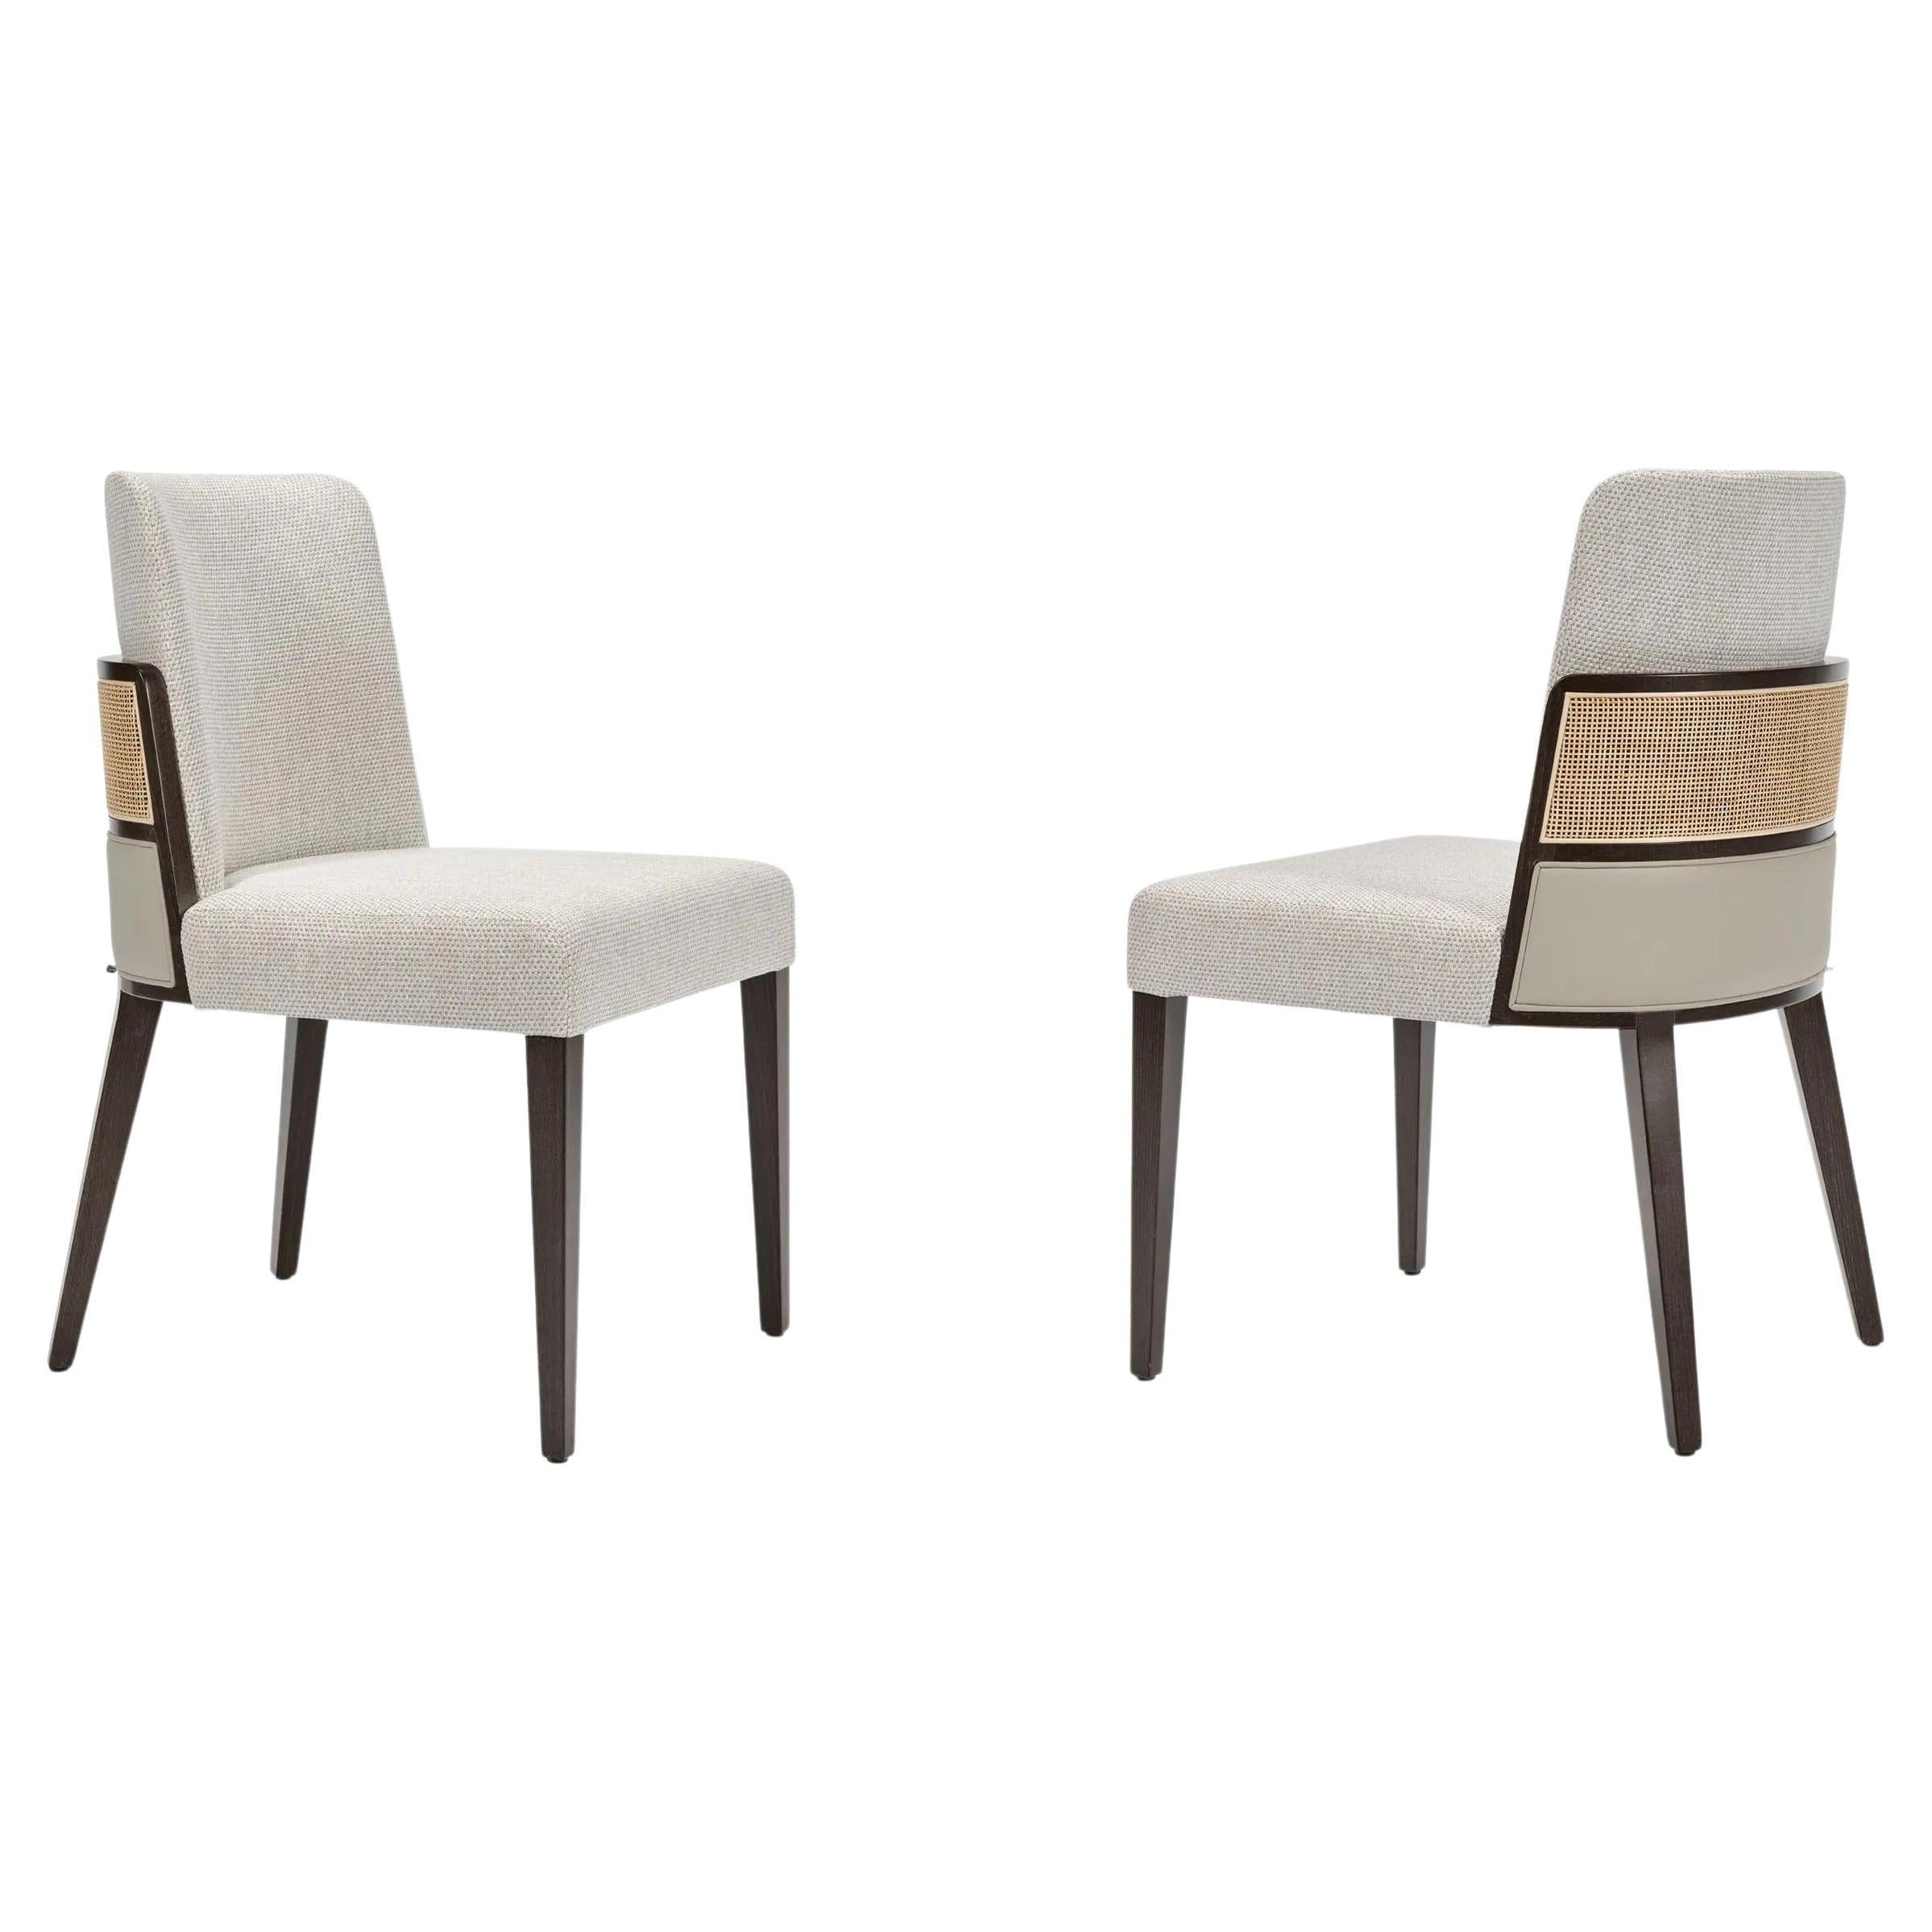 Customizable Dining Chair In Leather And Rattan Detailing 